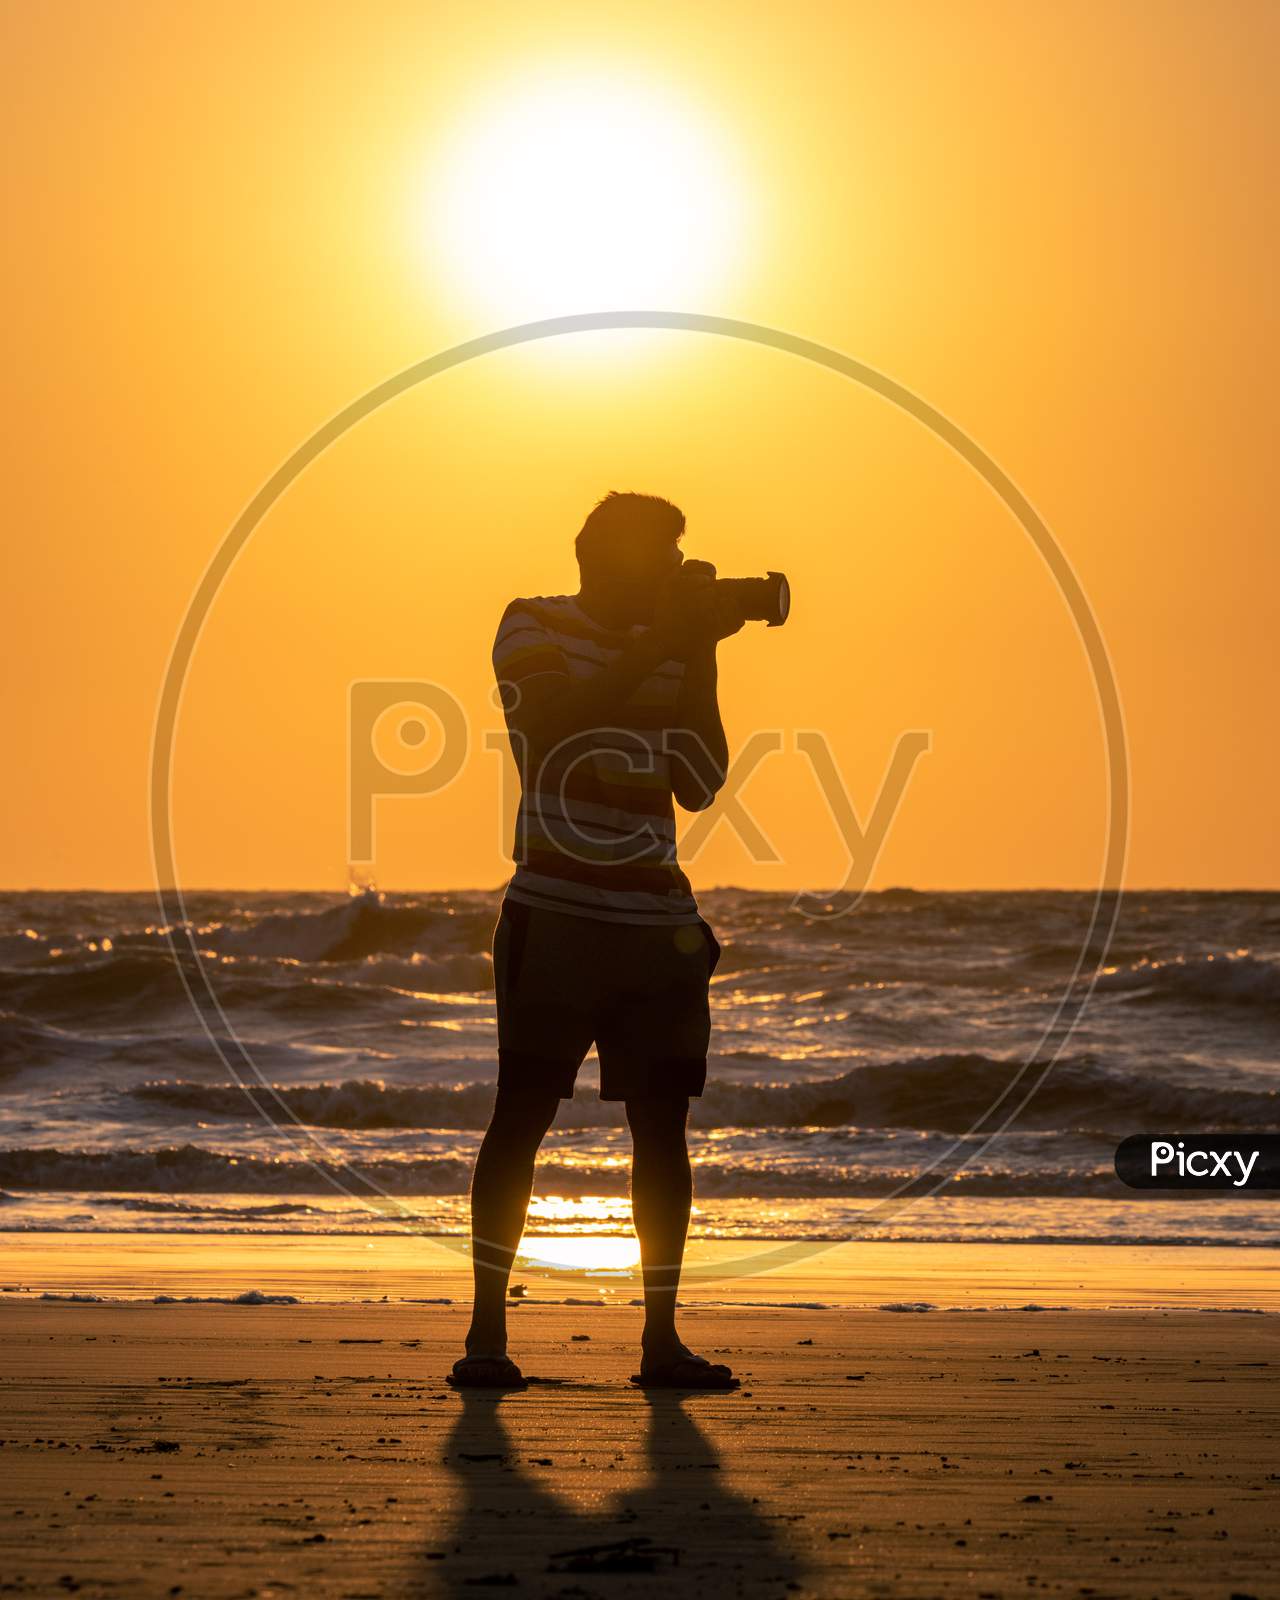 Silhouette Of a Photographer At a Beach Over a Sunset Sky